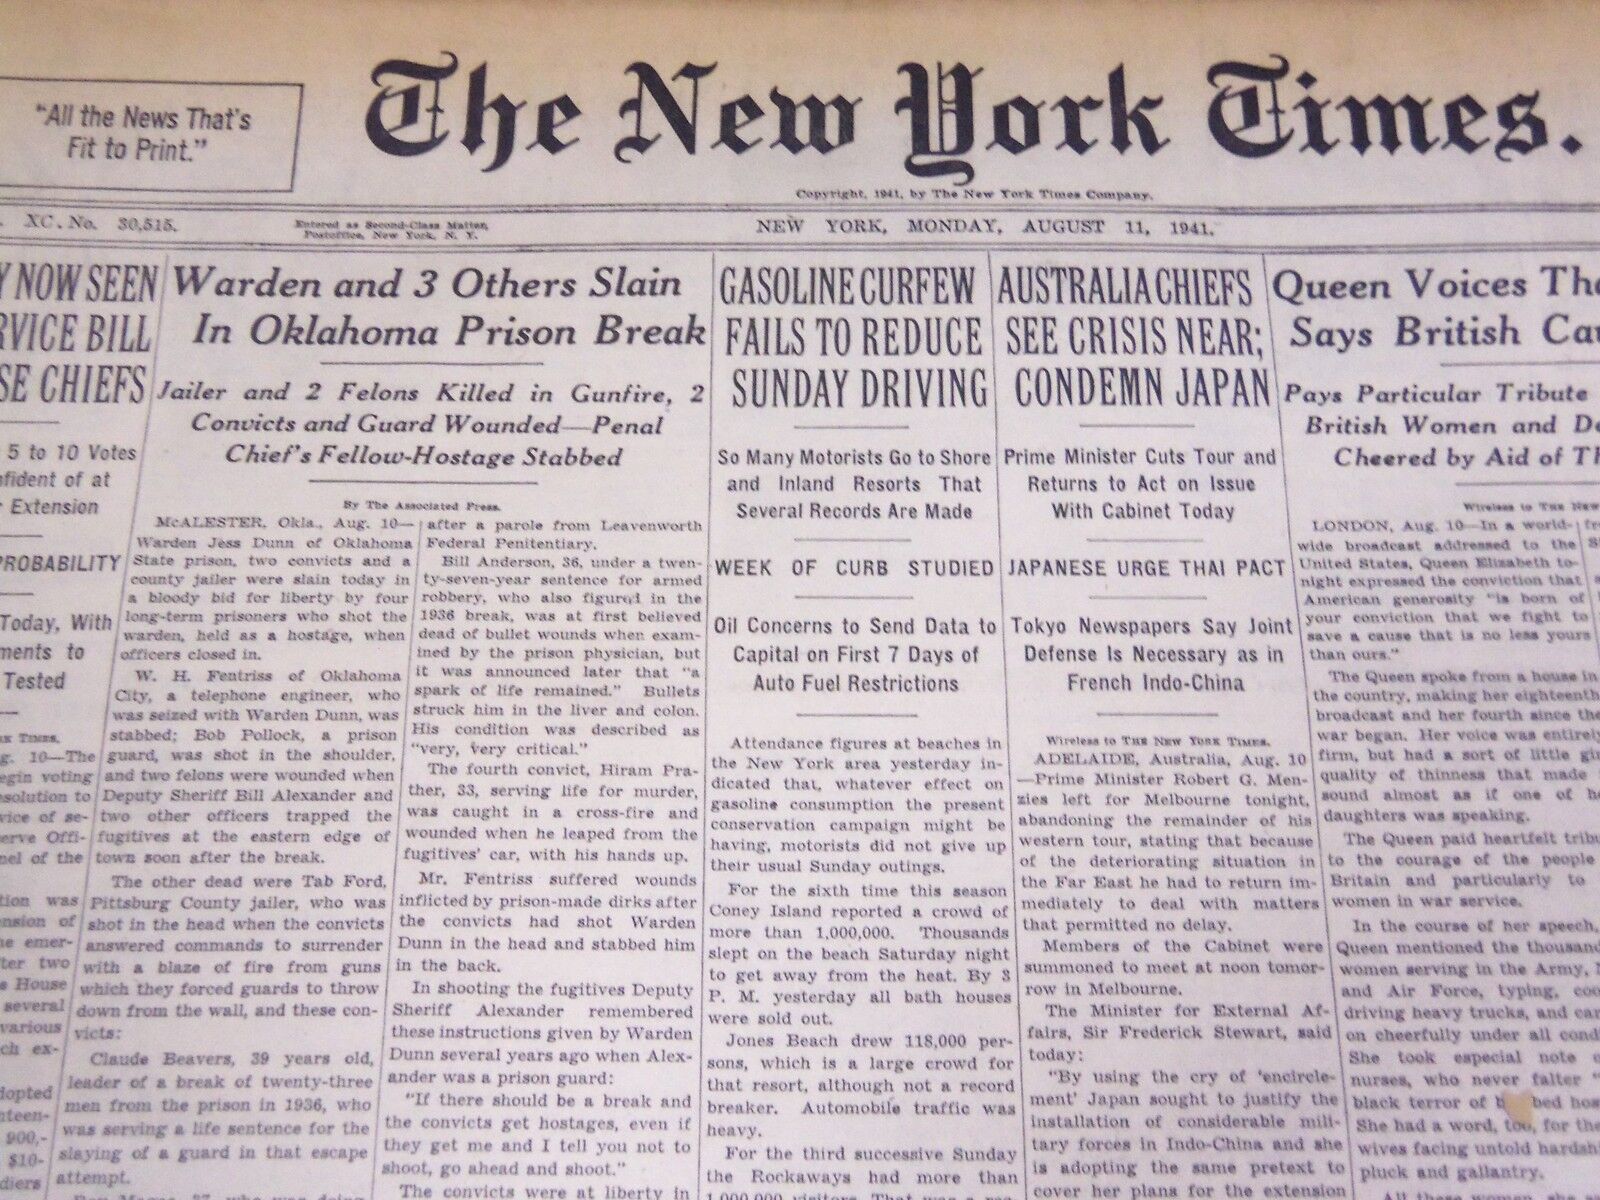 1941 AUG 11 NEW YORK TIMES - WARDEN & 3 OTHERS SLAIN IN OKLAHOMA PRISON- NT 1160